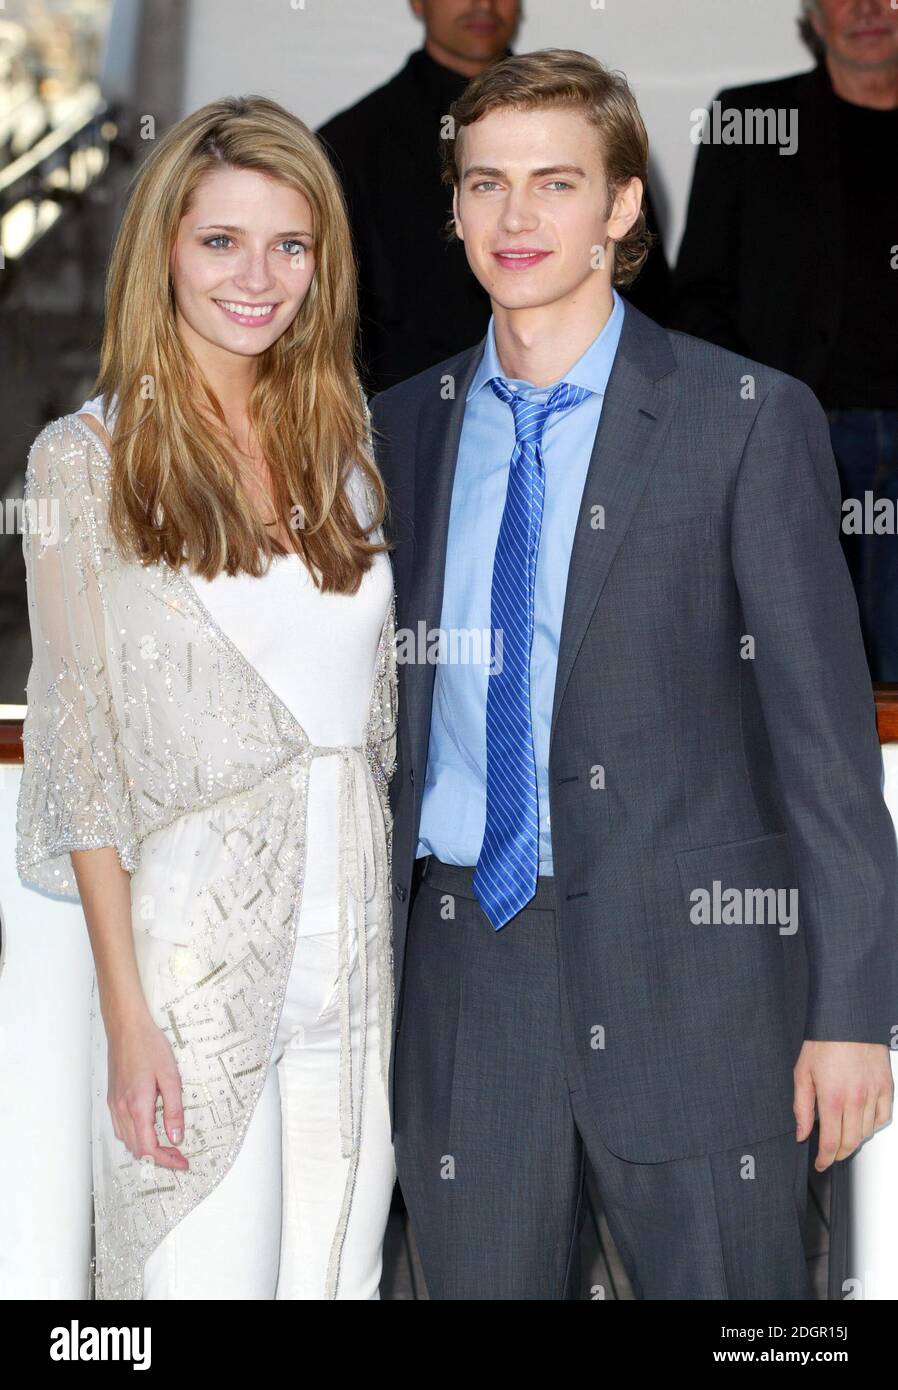 Mischa Barton and Hayden Christensen at the Decameron photocall, Cannes harbour. Part of the 58th Festival De Cannes. Doug Peters/allactiondigital.com   Stock Photo